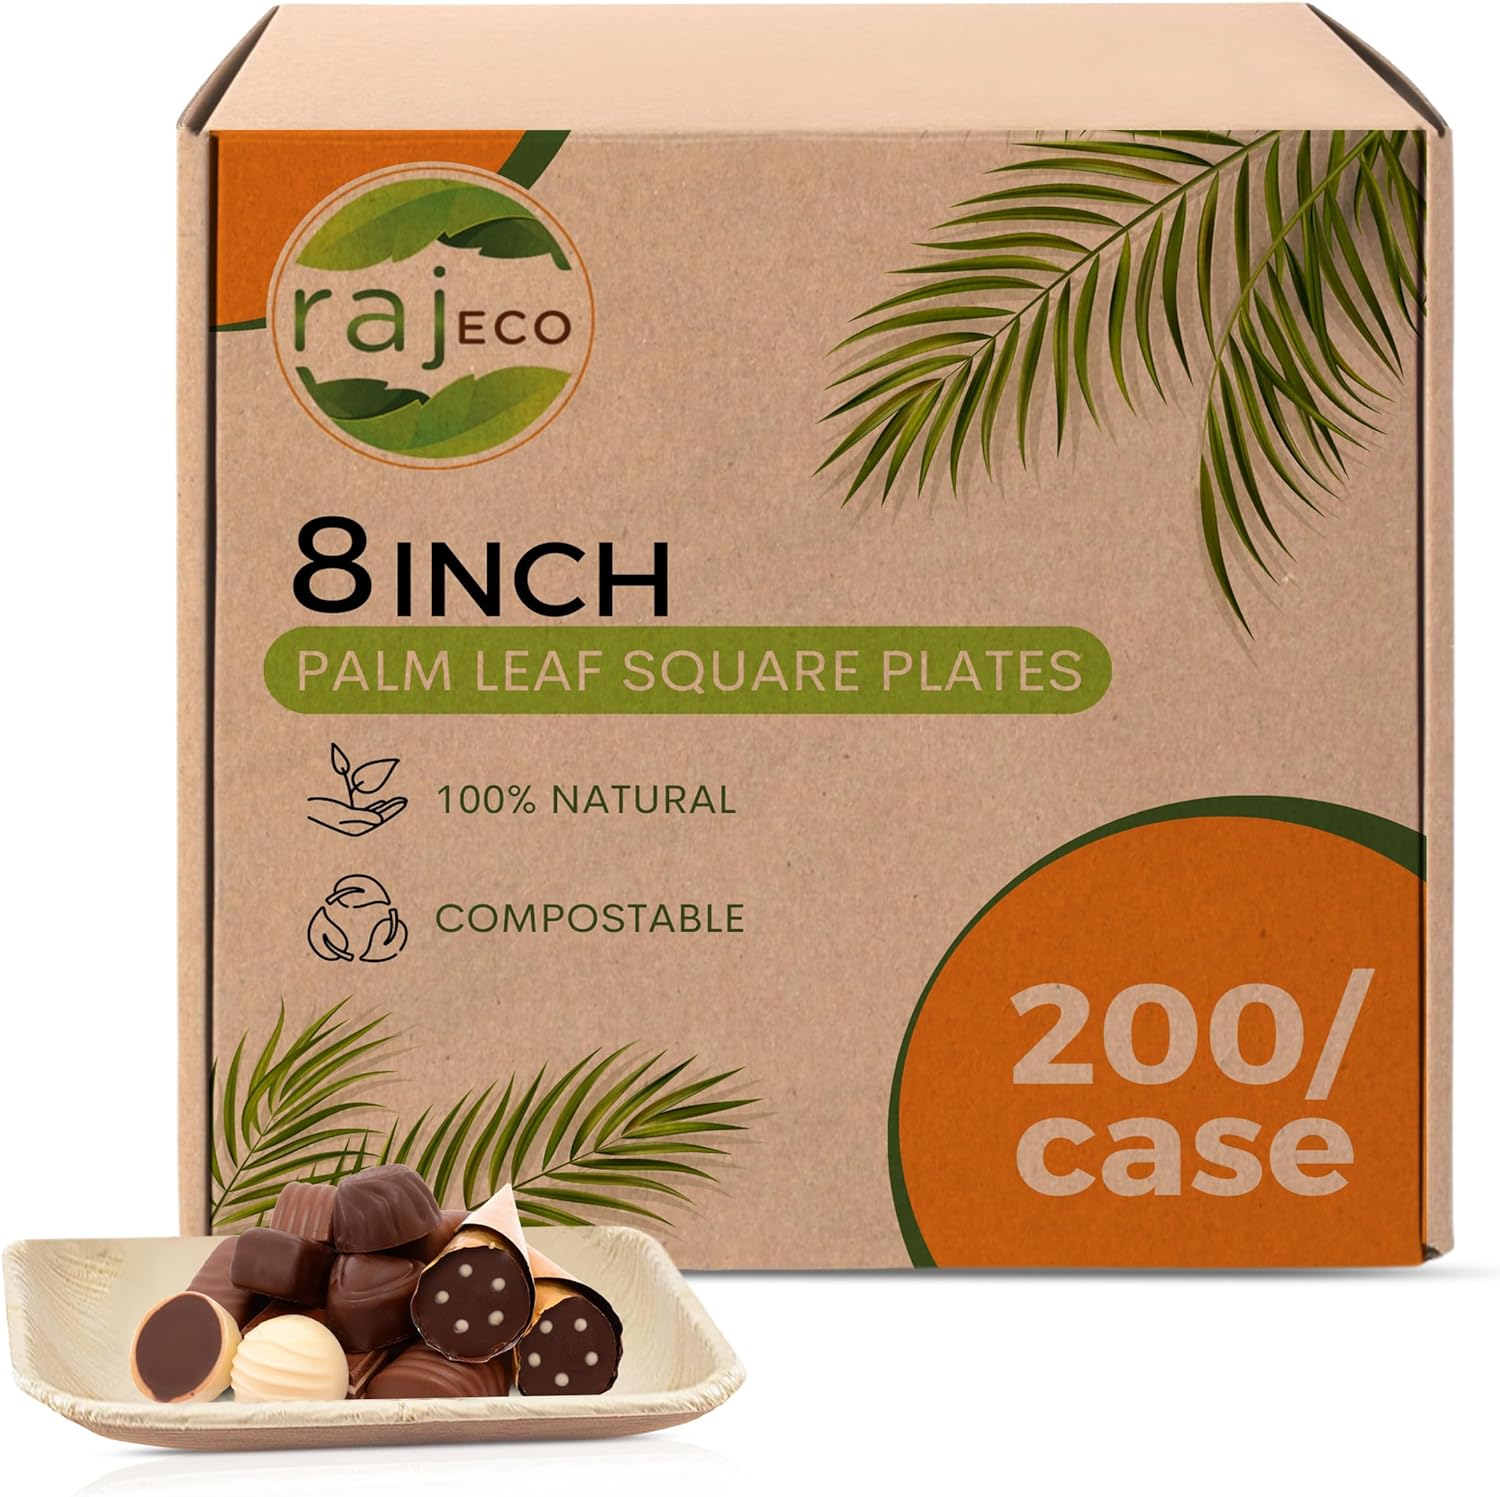 Compostable Palm Leaf Plates Like Bamboo Plates Disposable - 8 Inches Square Plates